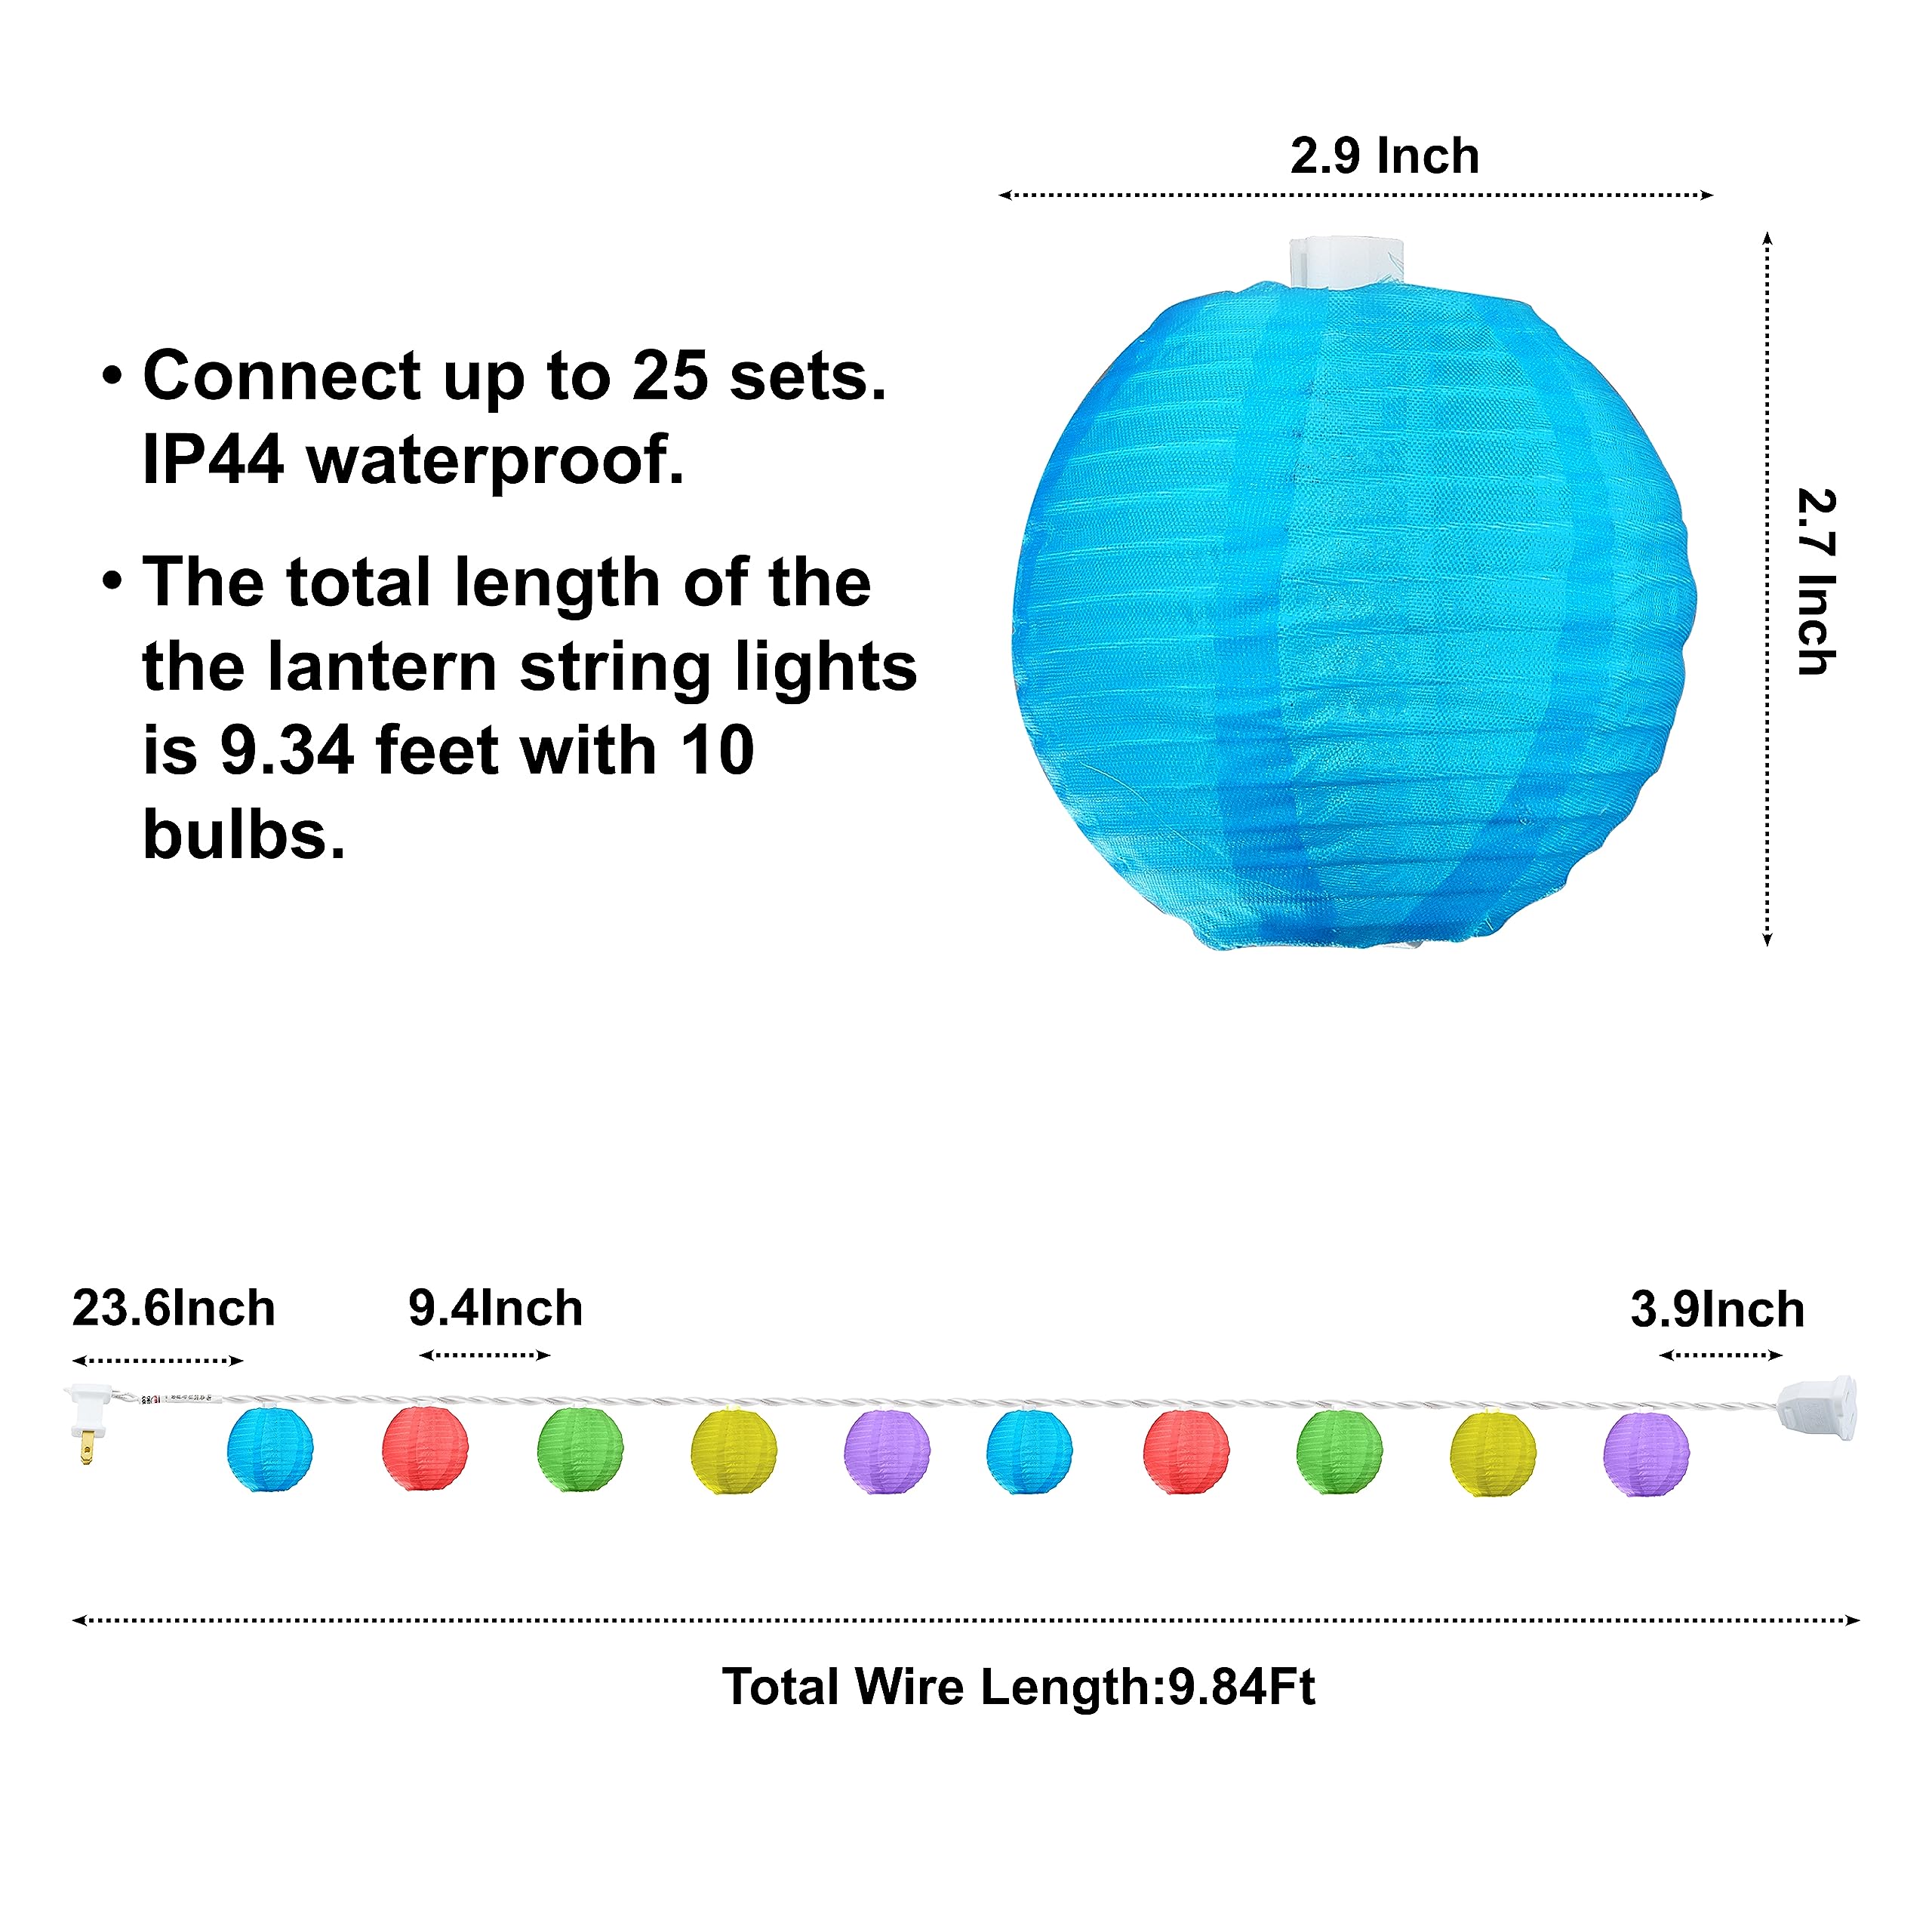 VCOKEN Lantern String Lights Multicolor, 9.84 FT Colorful Hanging Lanterns for Holiday, Plug-in Nylon Mini Lantern Lights for Patio, Bedroom, Party, IP44 Waterproof (Lantern Lights Unassembled)